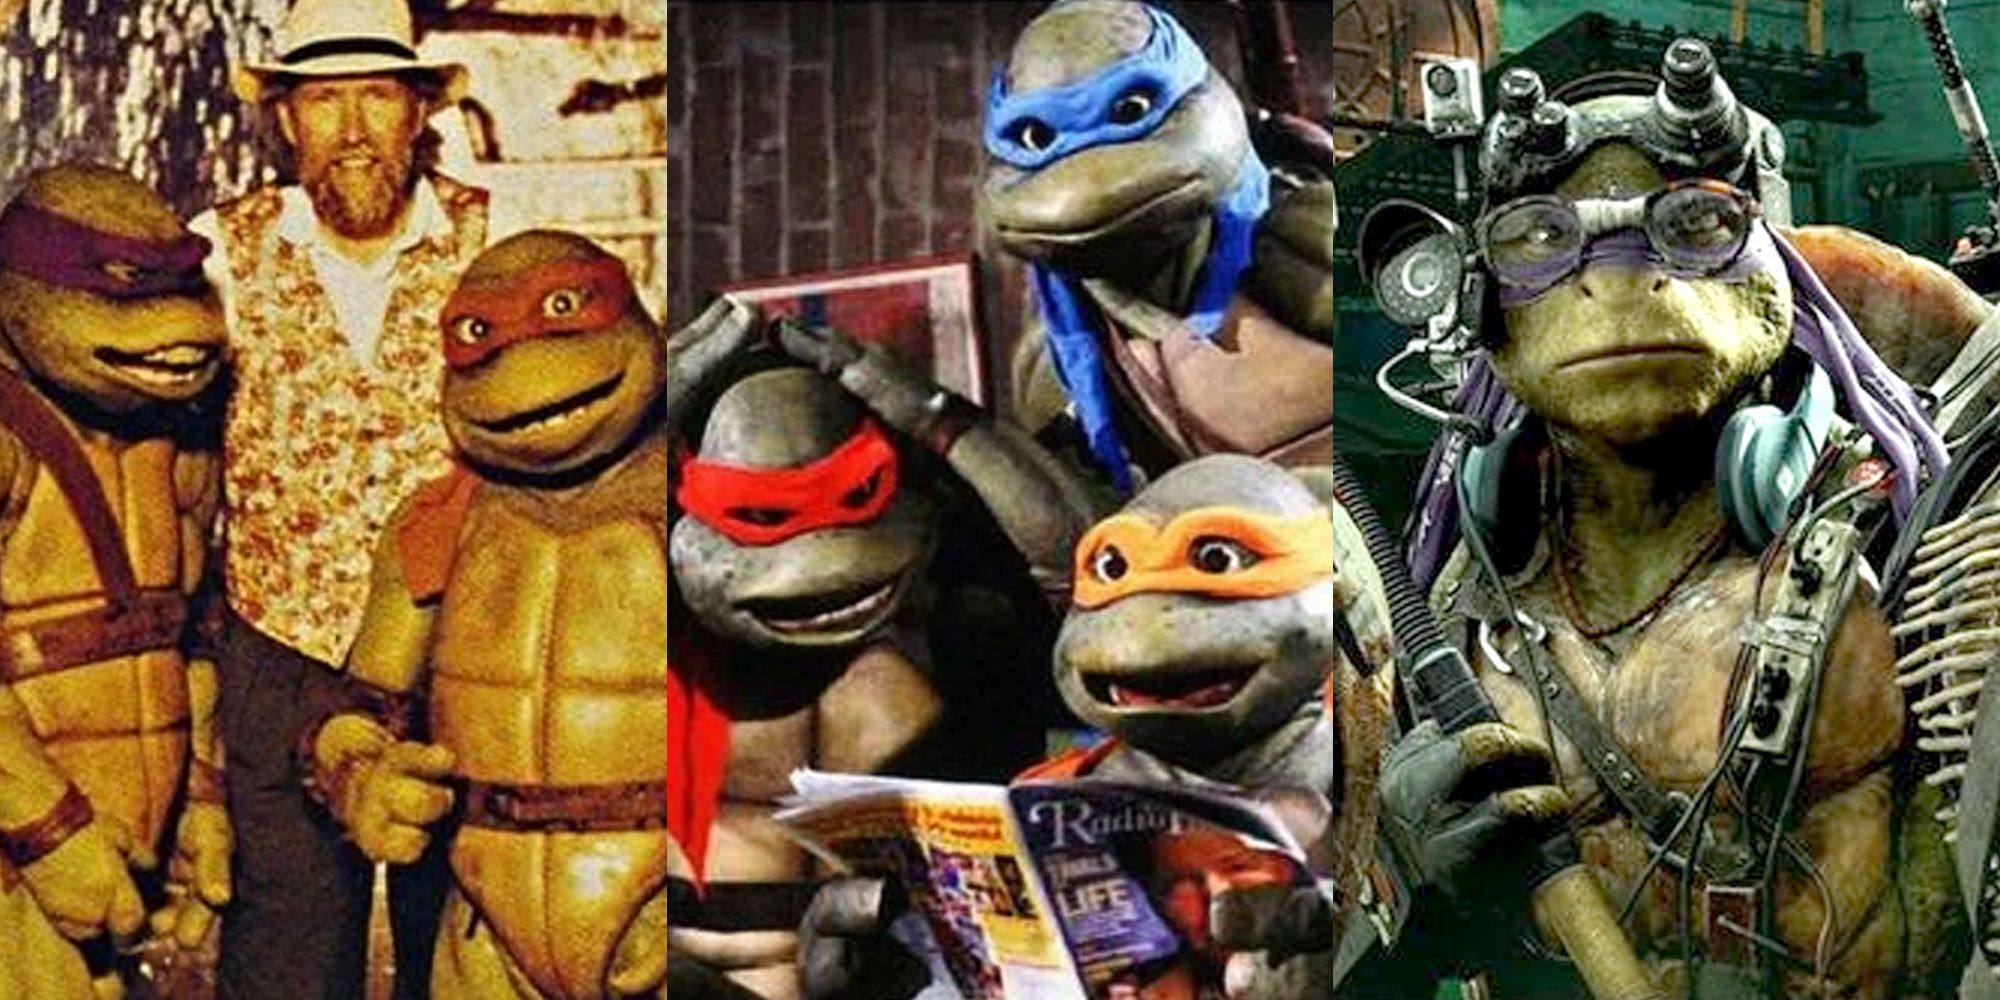 A splt image features three different depictions of the Teenage Mutant Ninja Turtles in live action movies